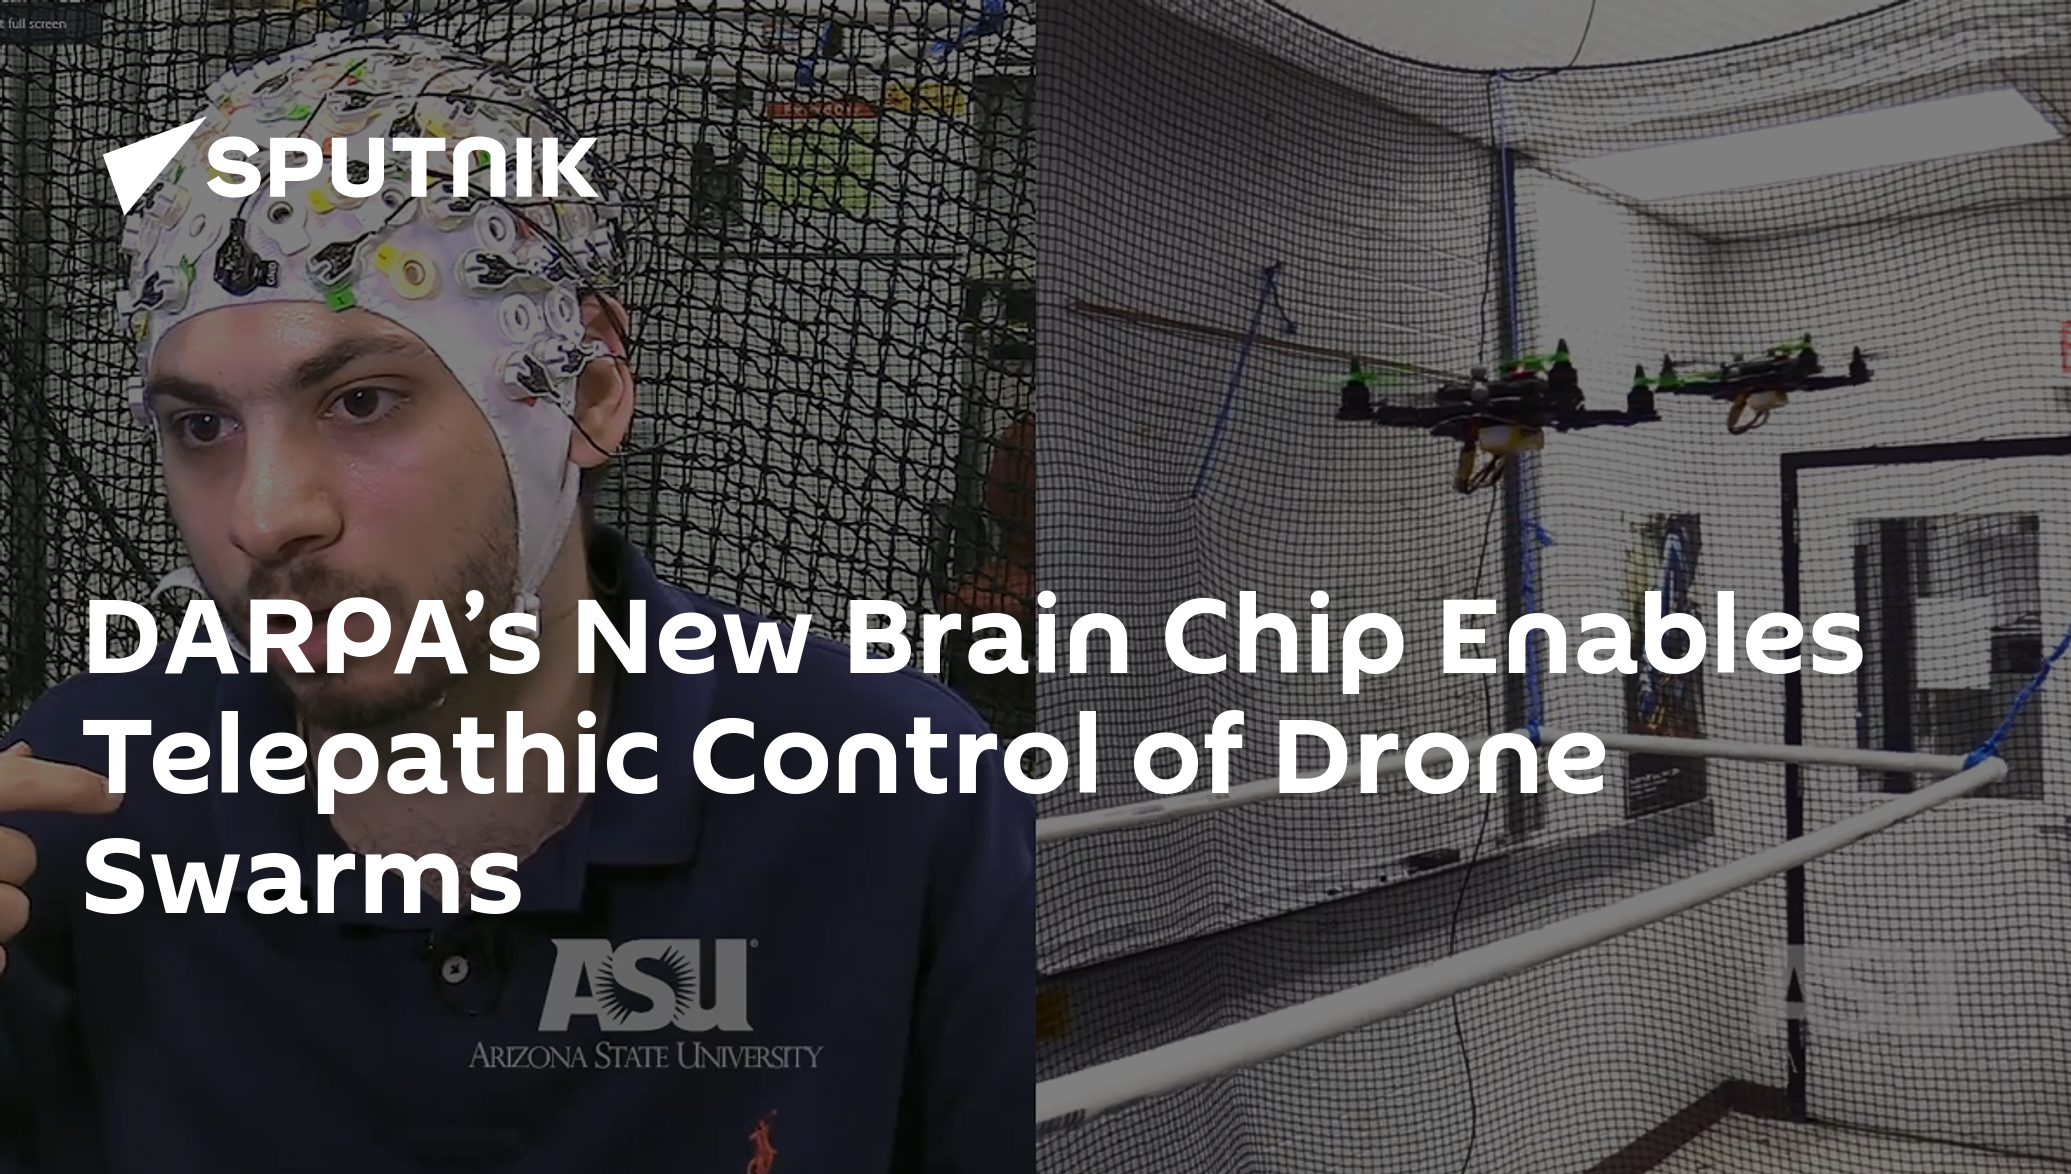 DARPA’s New Brain Chip Enables Telepathic Control of Drone Swarms